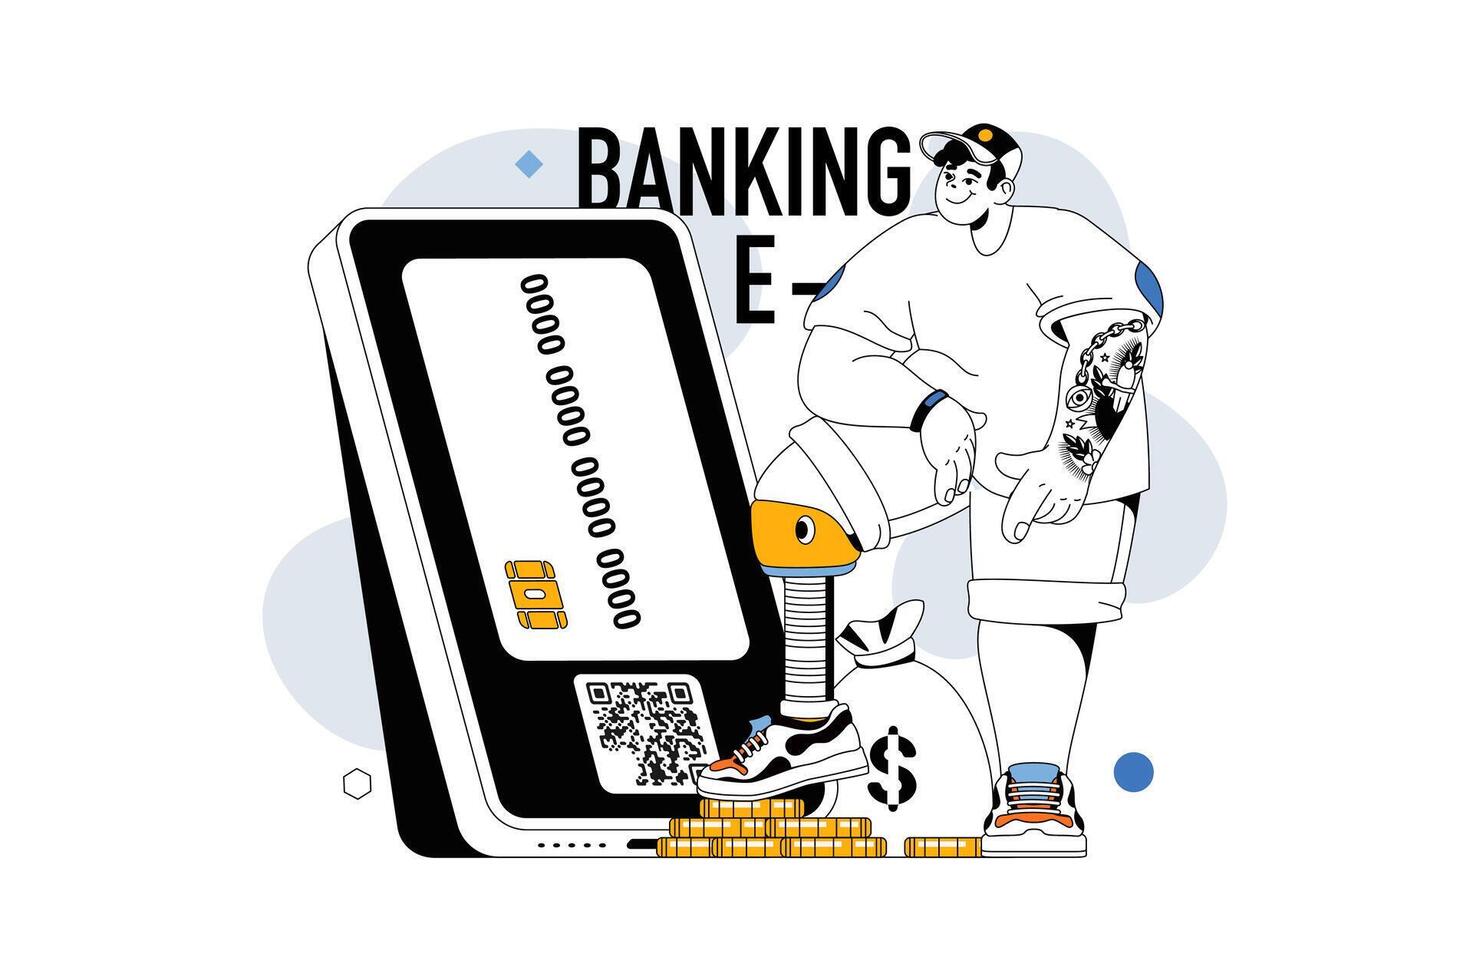 Online banking concept with people scene in flat line design for web. Man makes online transaction with e-wallet or credit card in app. Vector illustration for social media banner, marketing material.